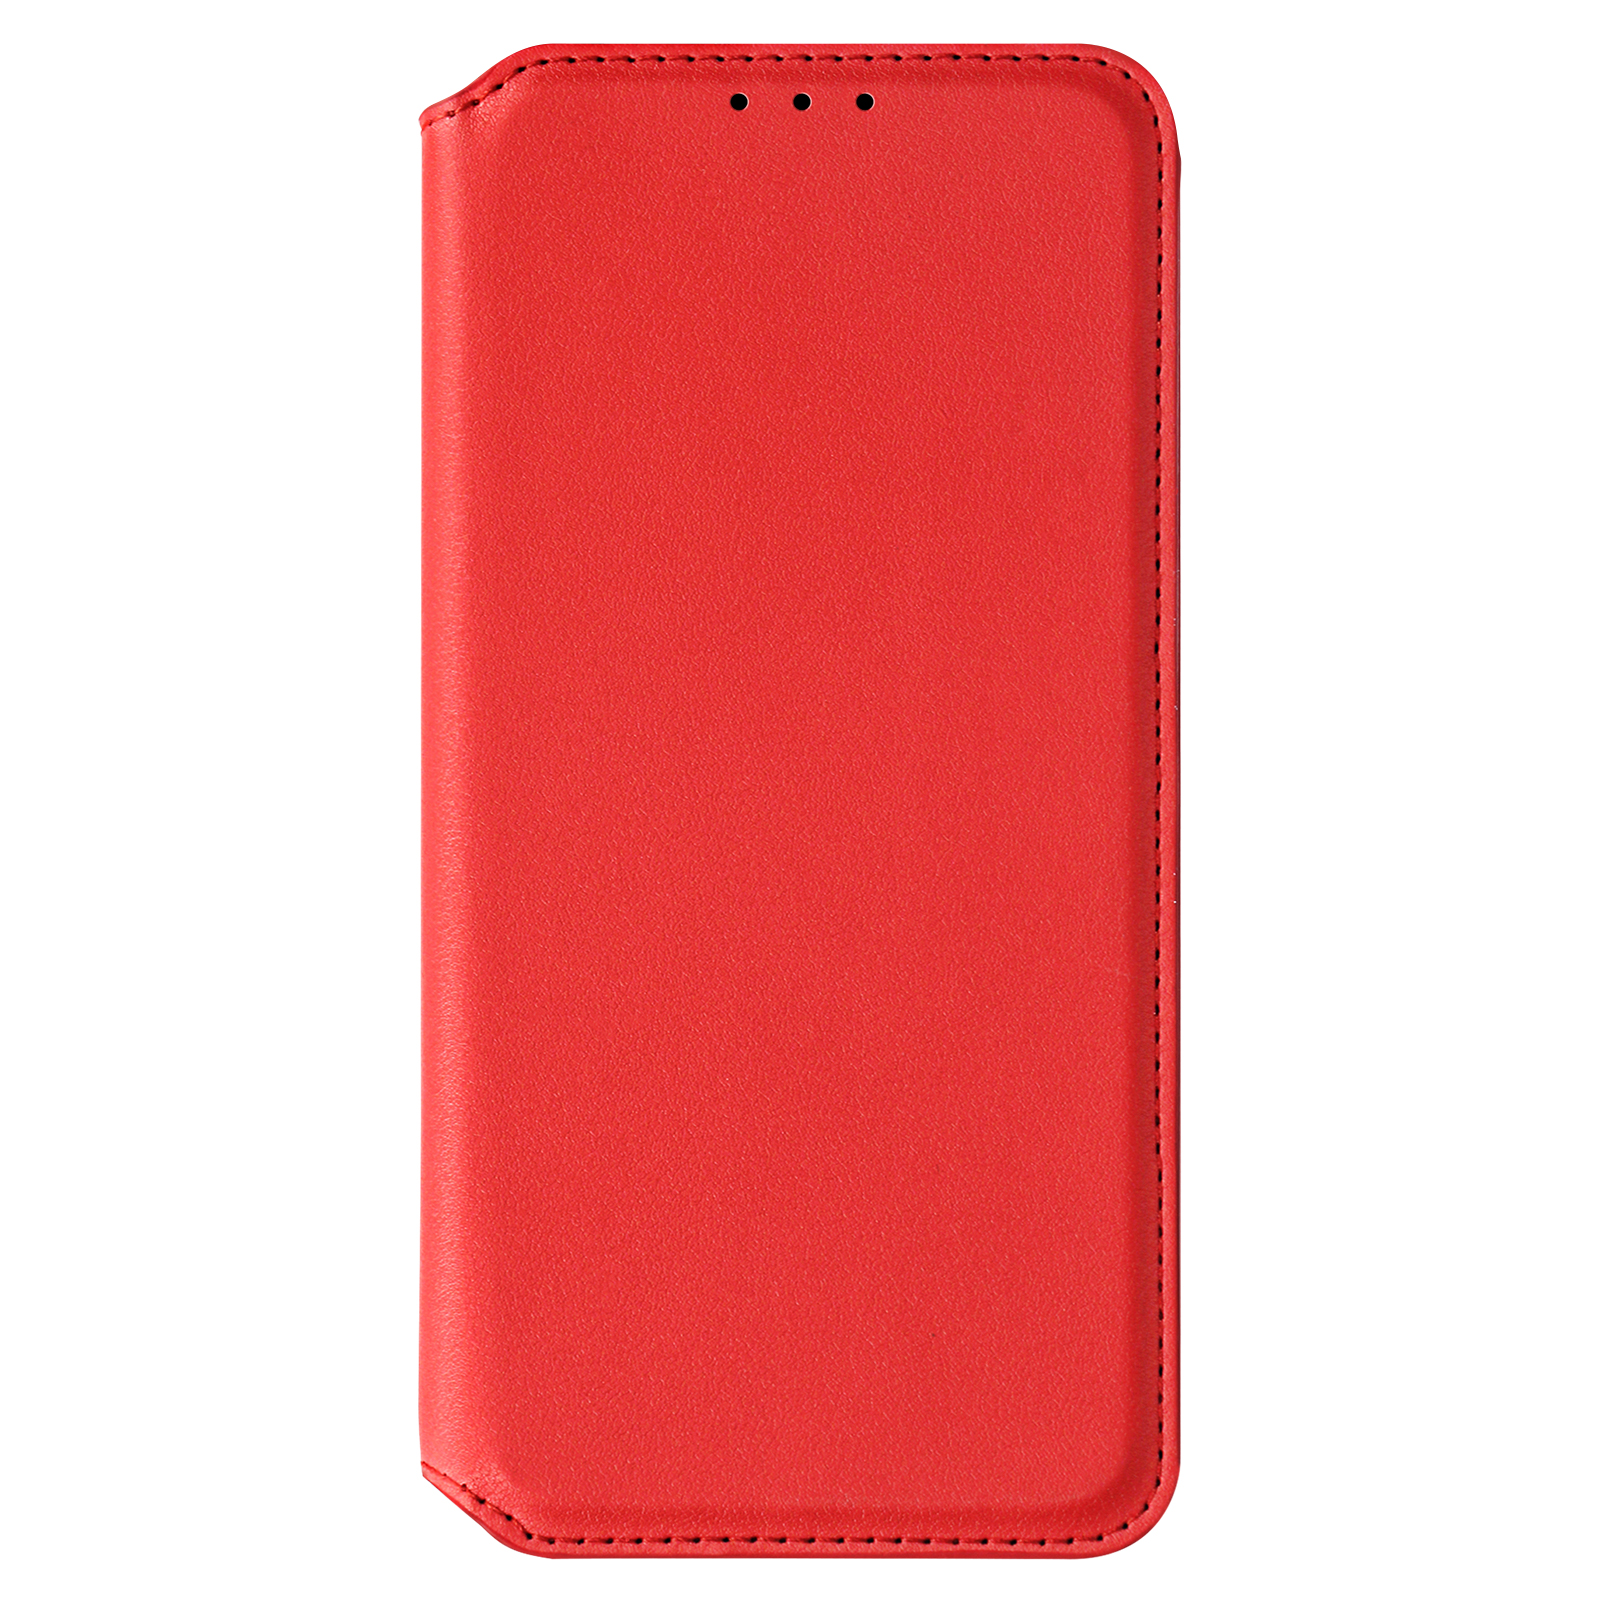 Magnetklappe Galaxy FE, Bookcover, S21 Edition, Rot Backcover Series, Classic Samsung, AVIZAR mit